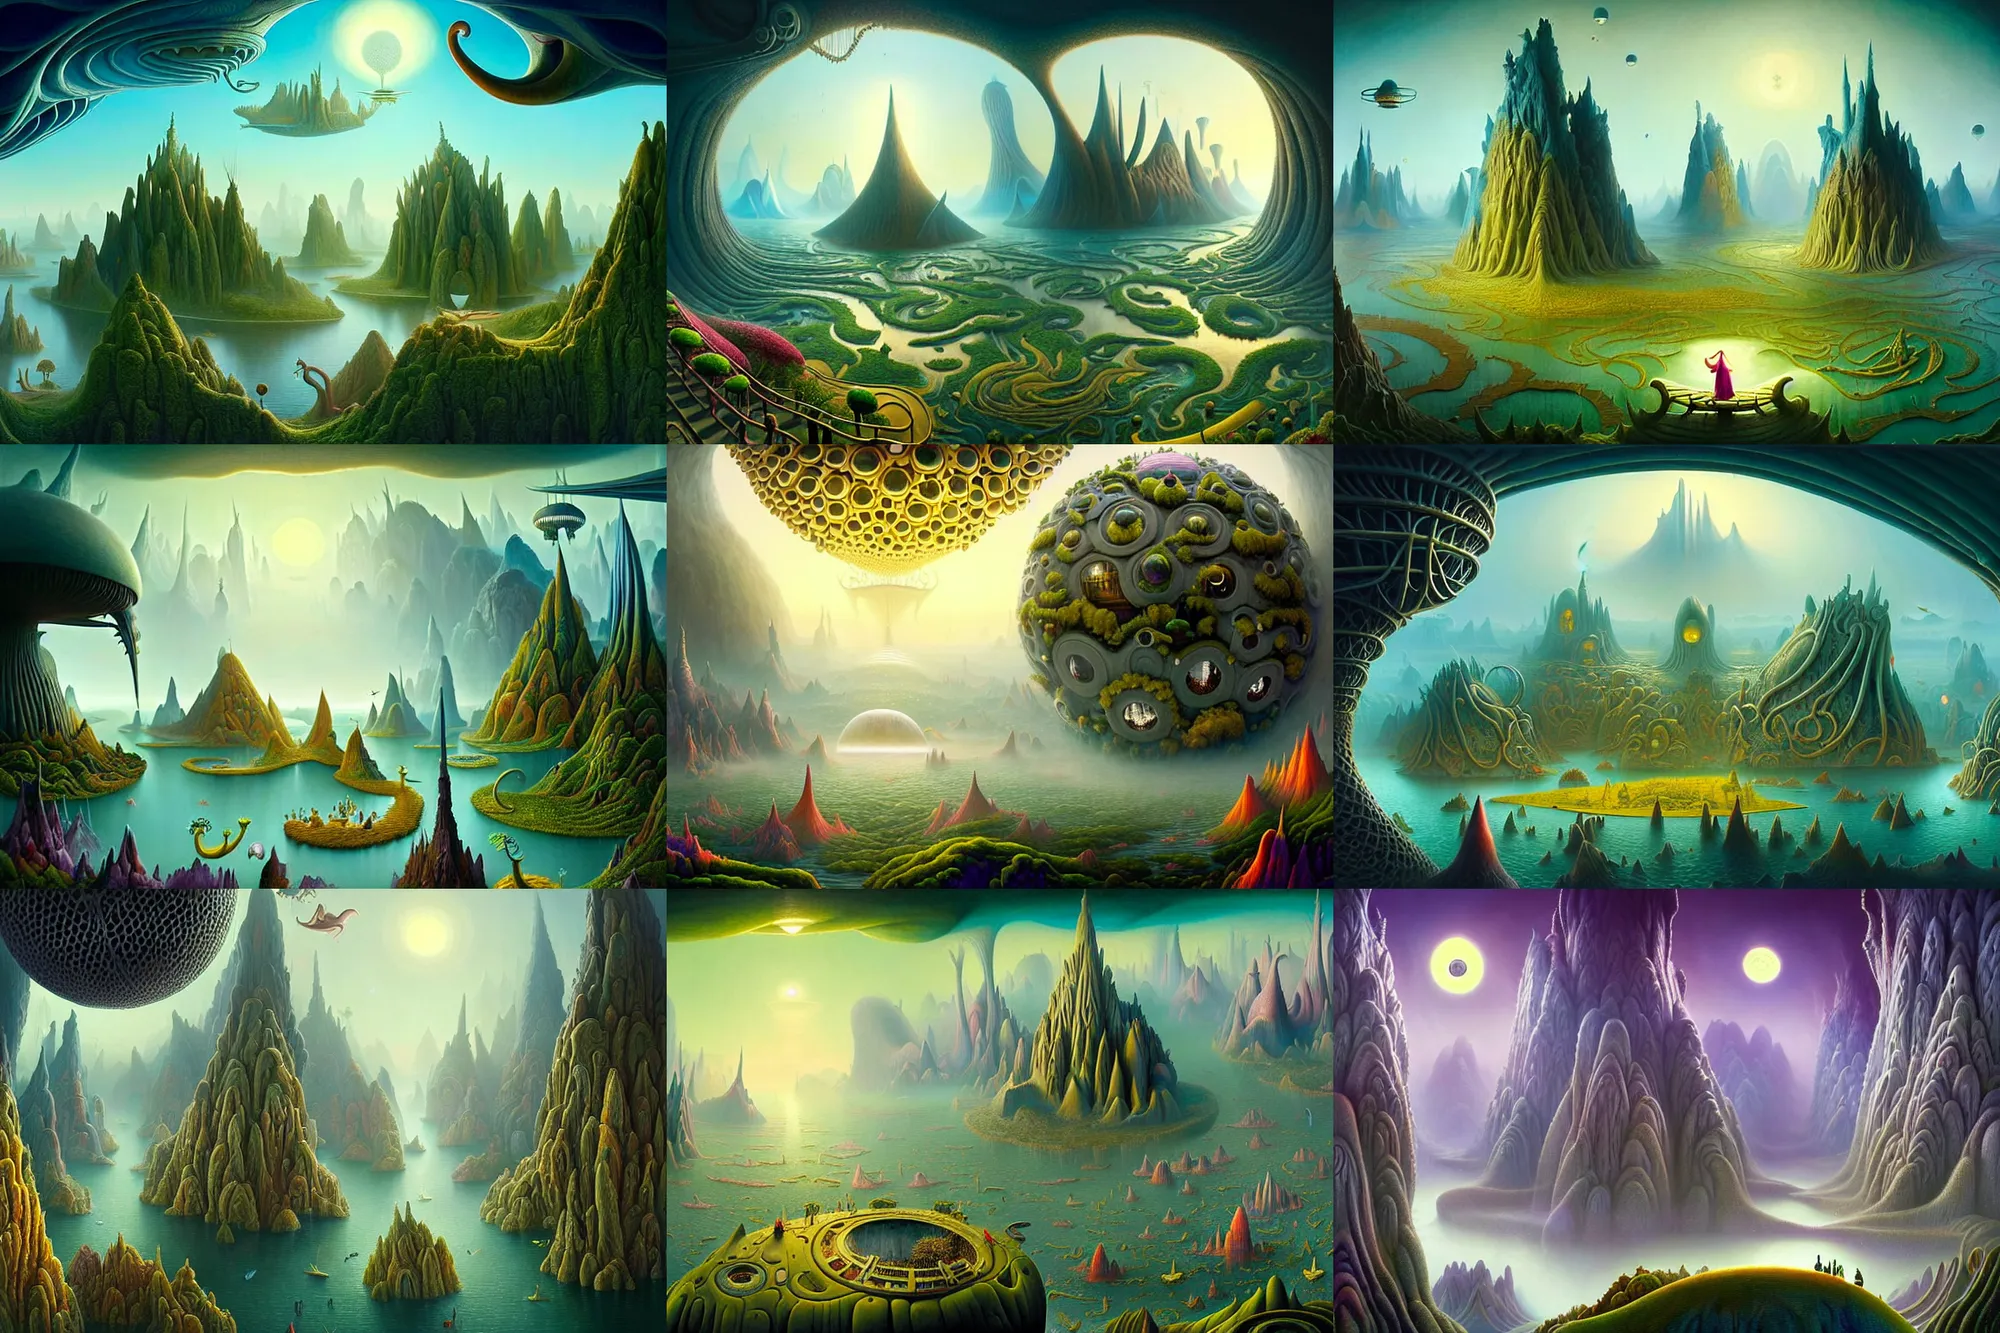 Prompt: a beautiful and insanely detailed matte painting of alien dream worlds with surreal architecture designed by Heironymous Bosch, mega structures inspired by Heironymous Bosch's Garden of Earthly Delights, vast surreal landscape and horizon by Asher Durand and Tyler Edlin and Cyril Rolando, masterpiece!!, grand!, imaginative!!!, whimsical!!, epic scale, intricate details, sense of awe, elite, wonder, insanely complex, masterful composition, sharp focus, fantasy realism, dramatic lighting